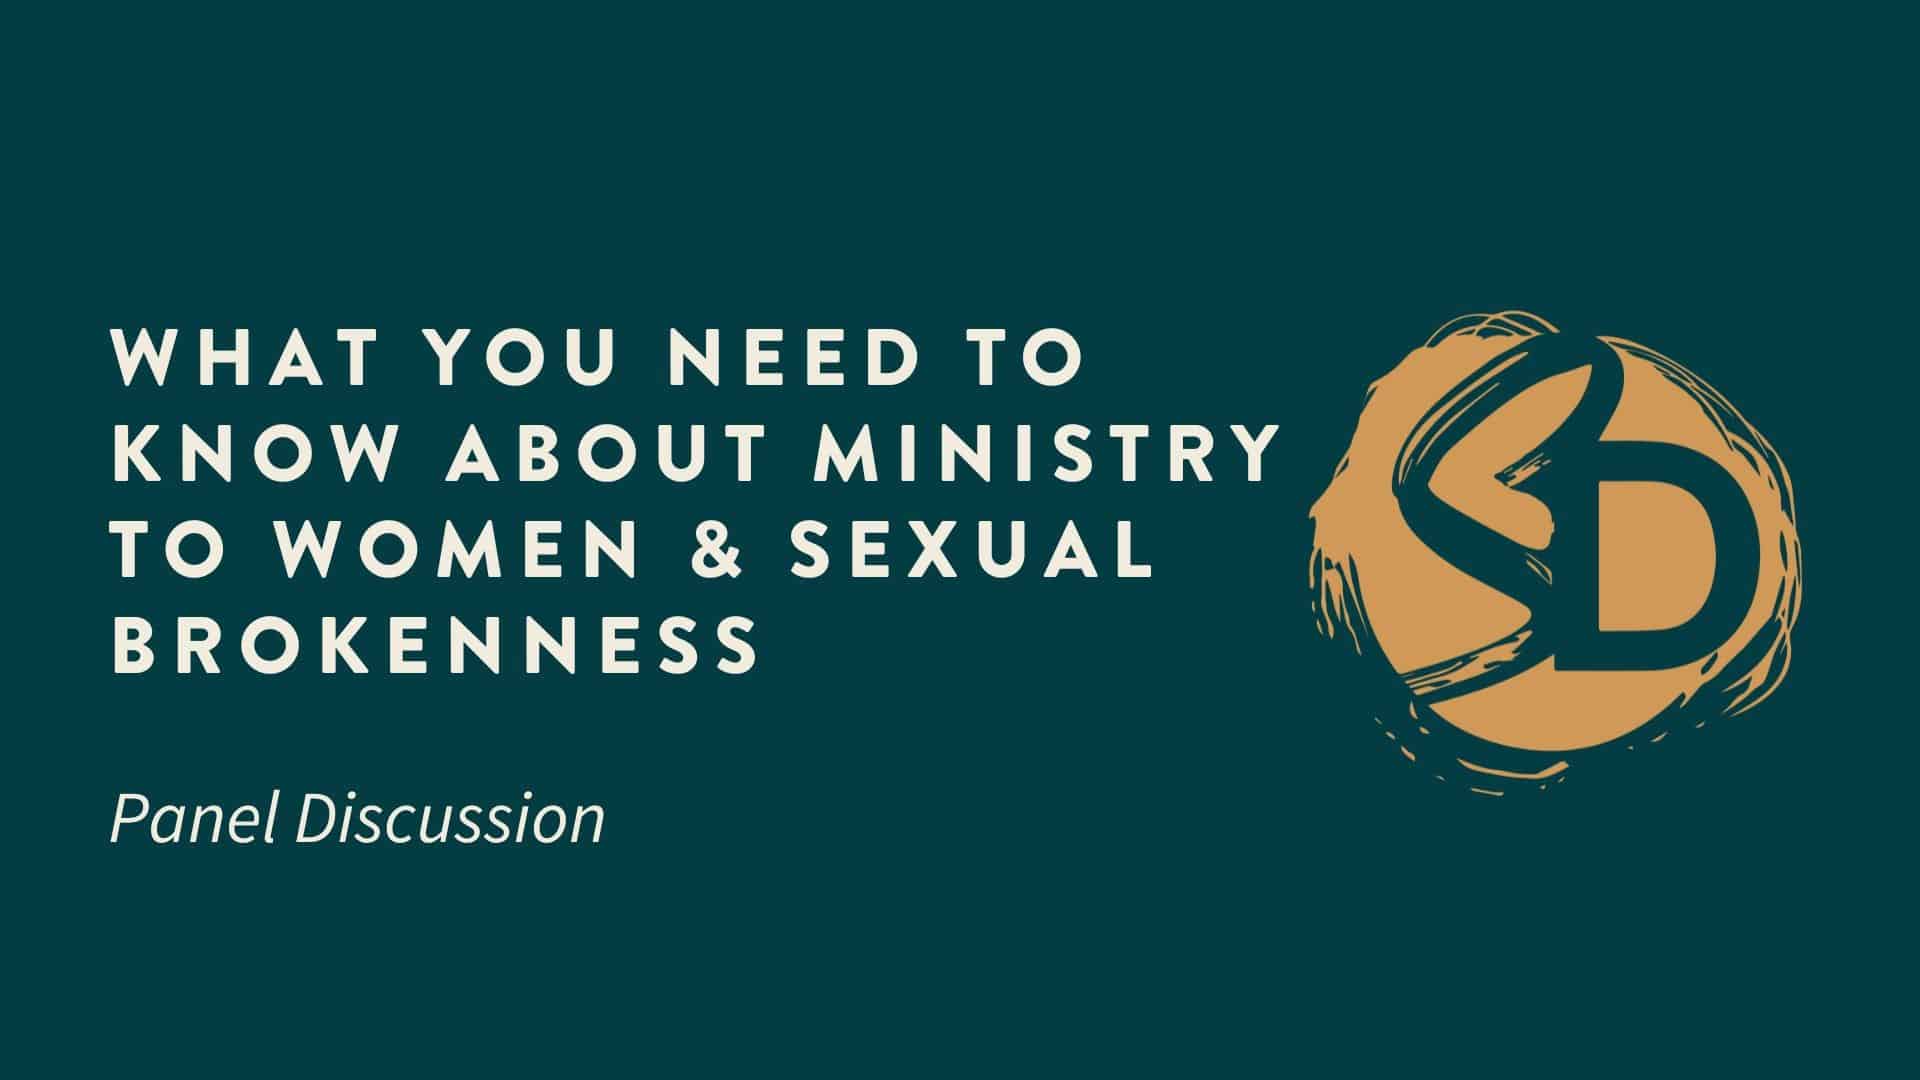 What You Need To Know About Ministry to Women & Sexual Brokenness